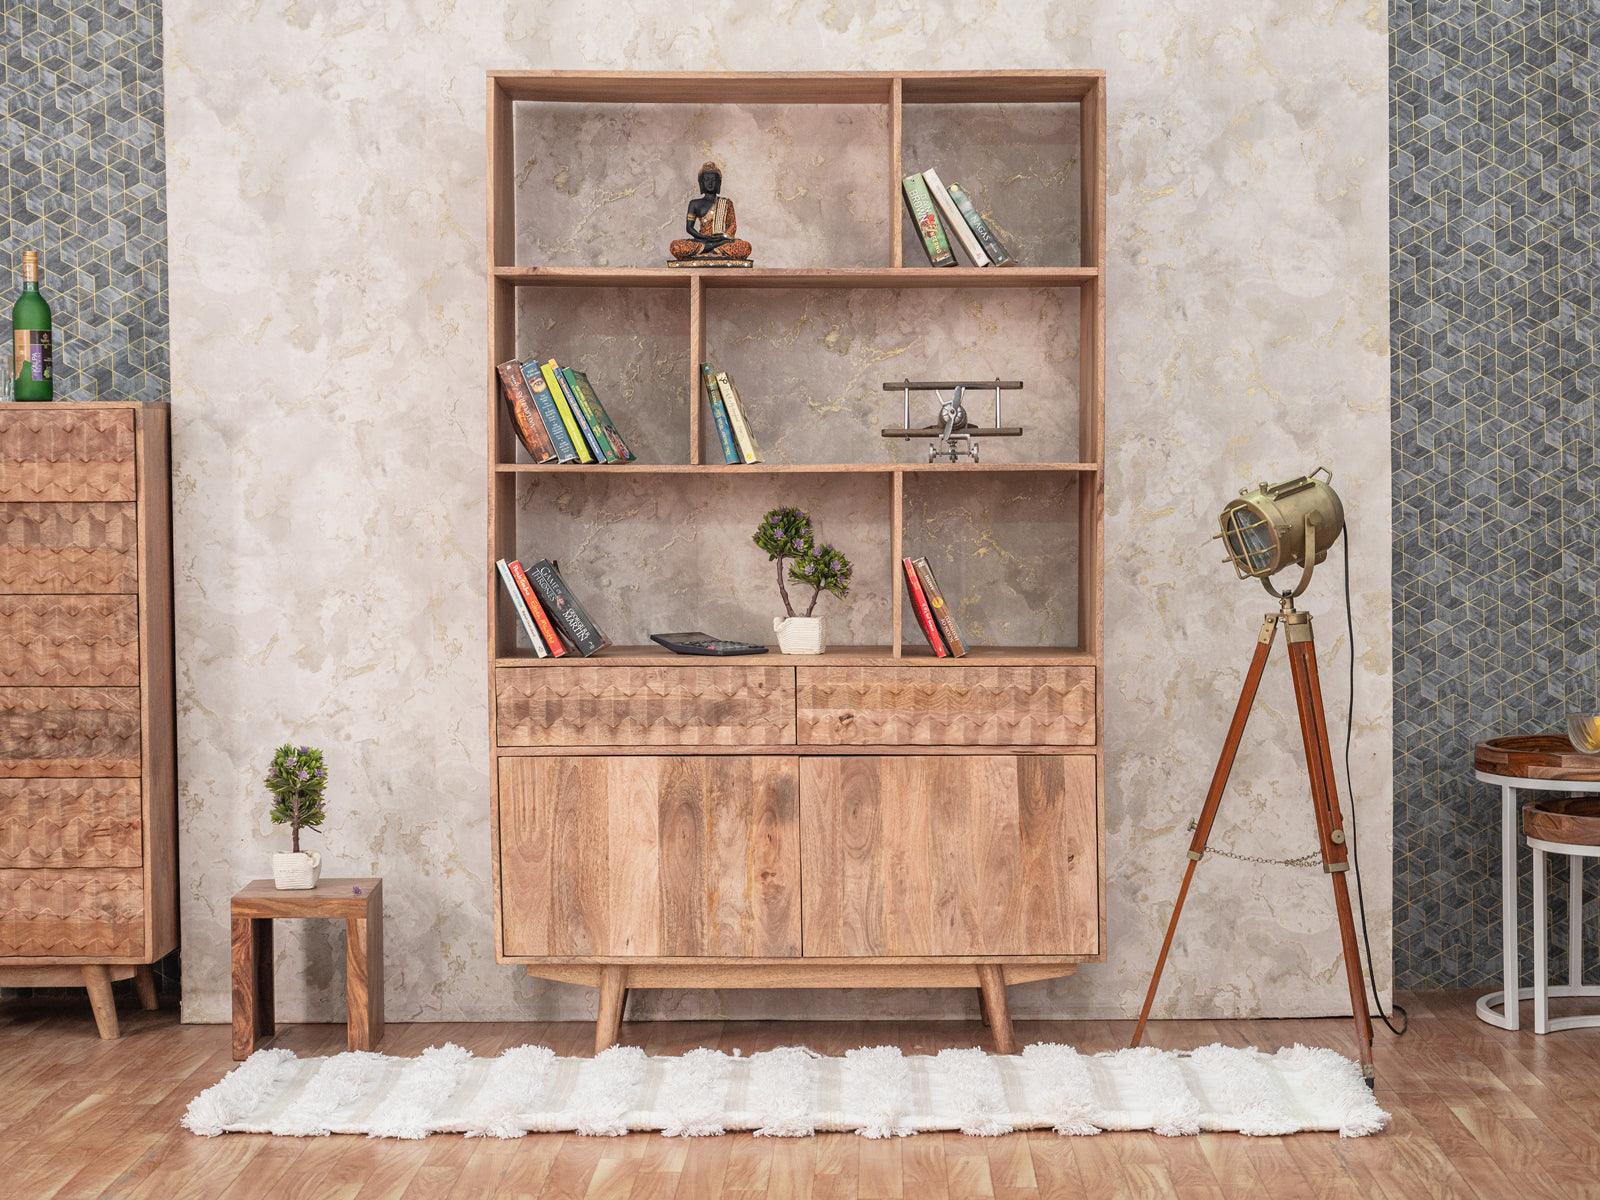 Top 10 Bookshelves for Stylish Storage and Display in Your Home